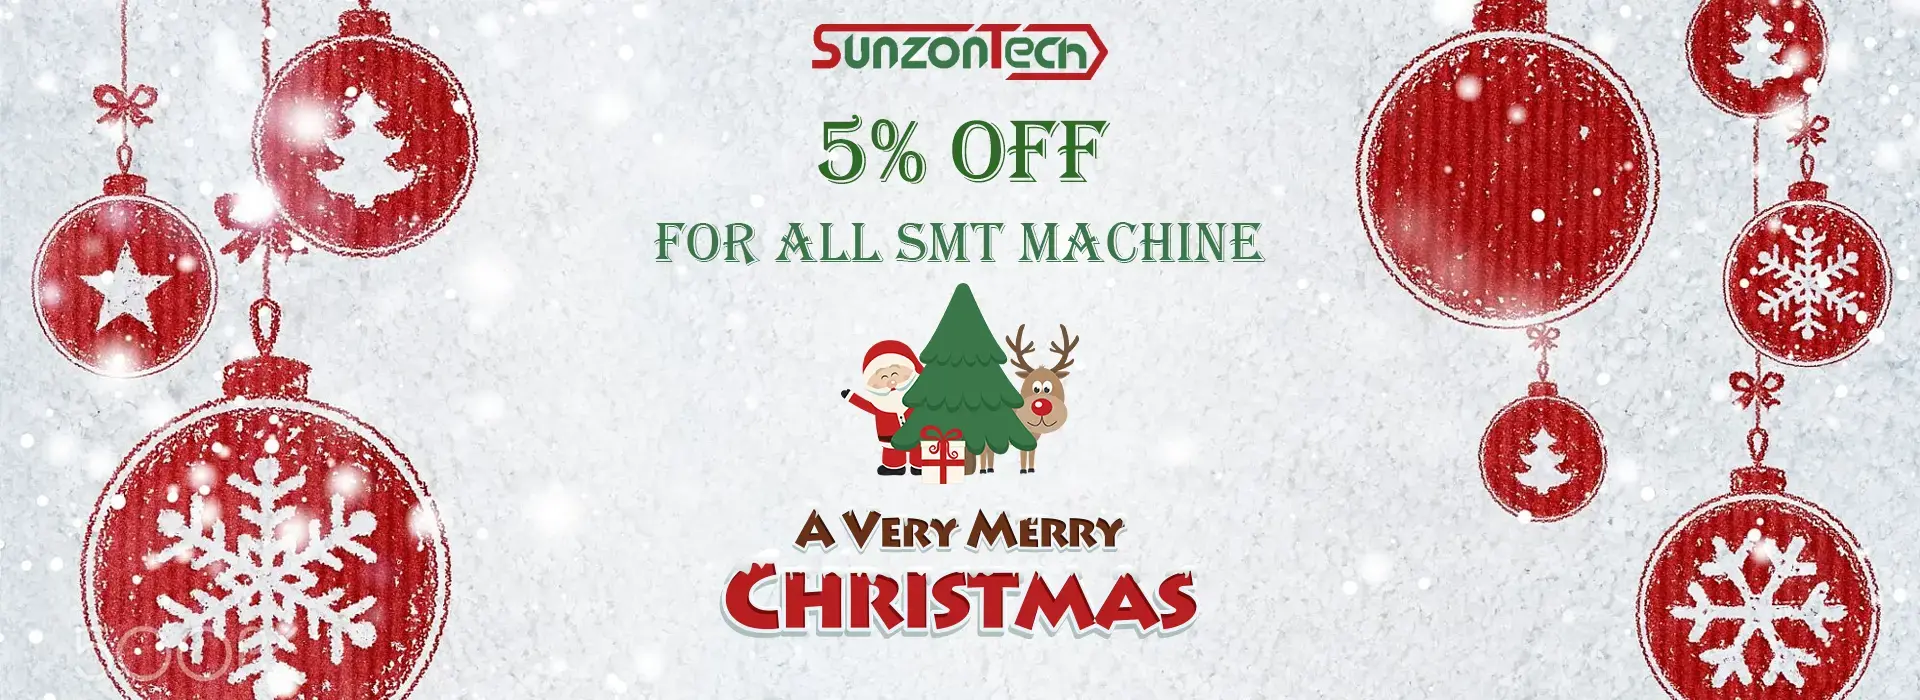 Christmas Promotion Is Coming | SunzonTech 